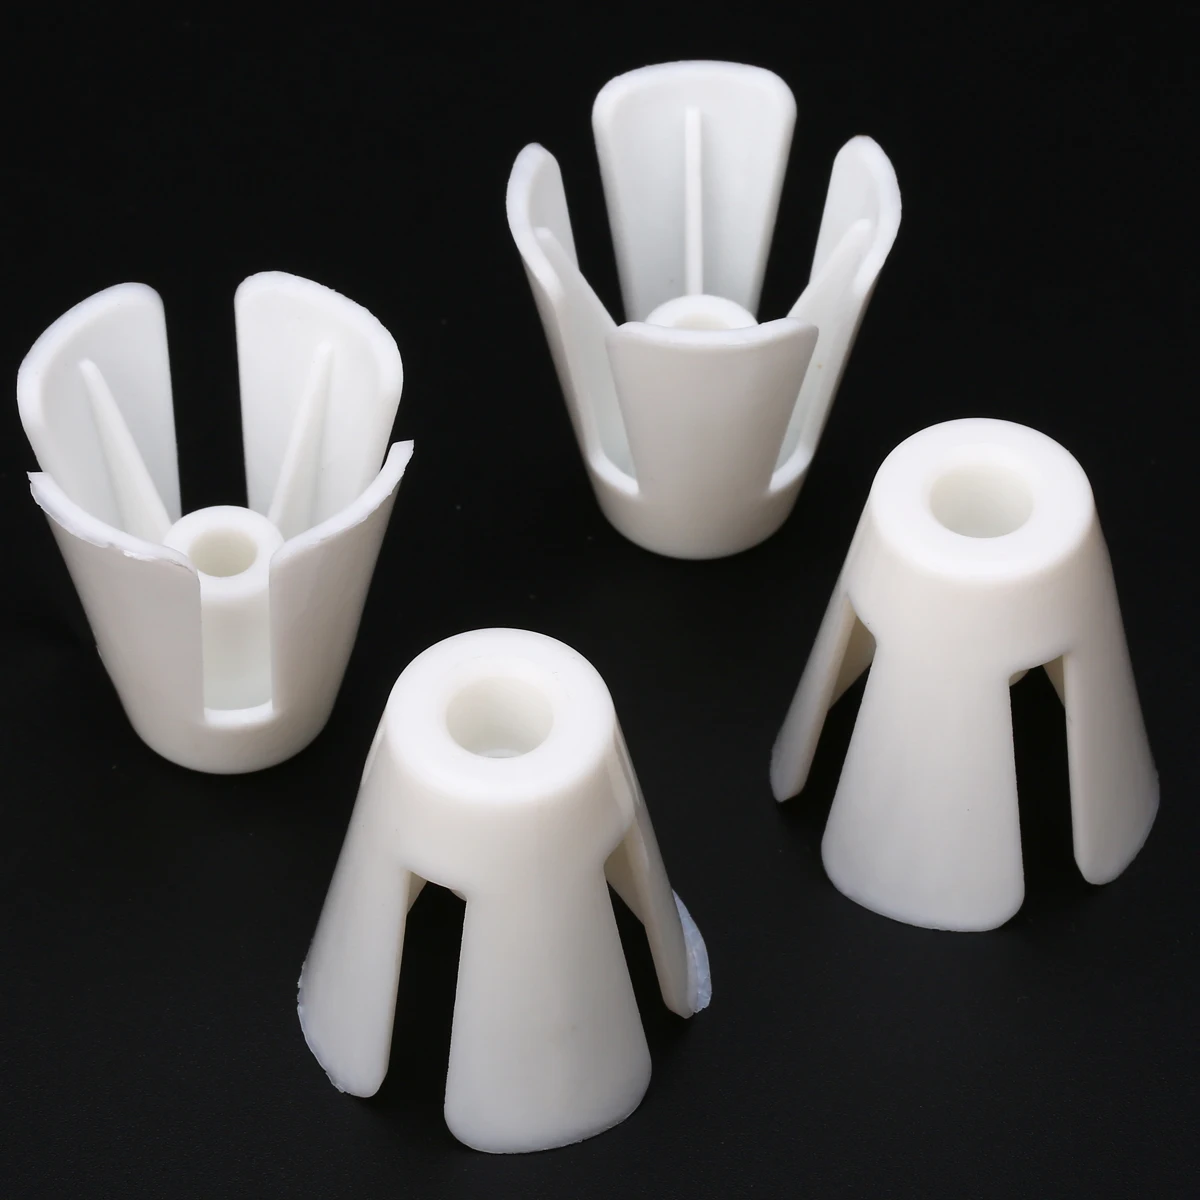 4pcs/Set Thread Spool Cone Holder Sewing Accessories for Janome 644D 74LD